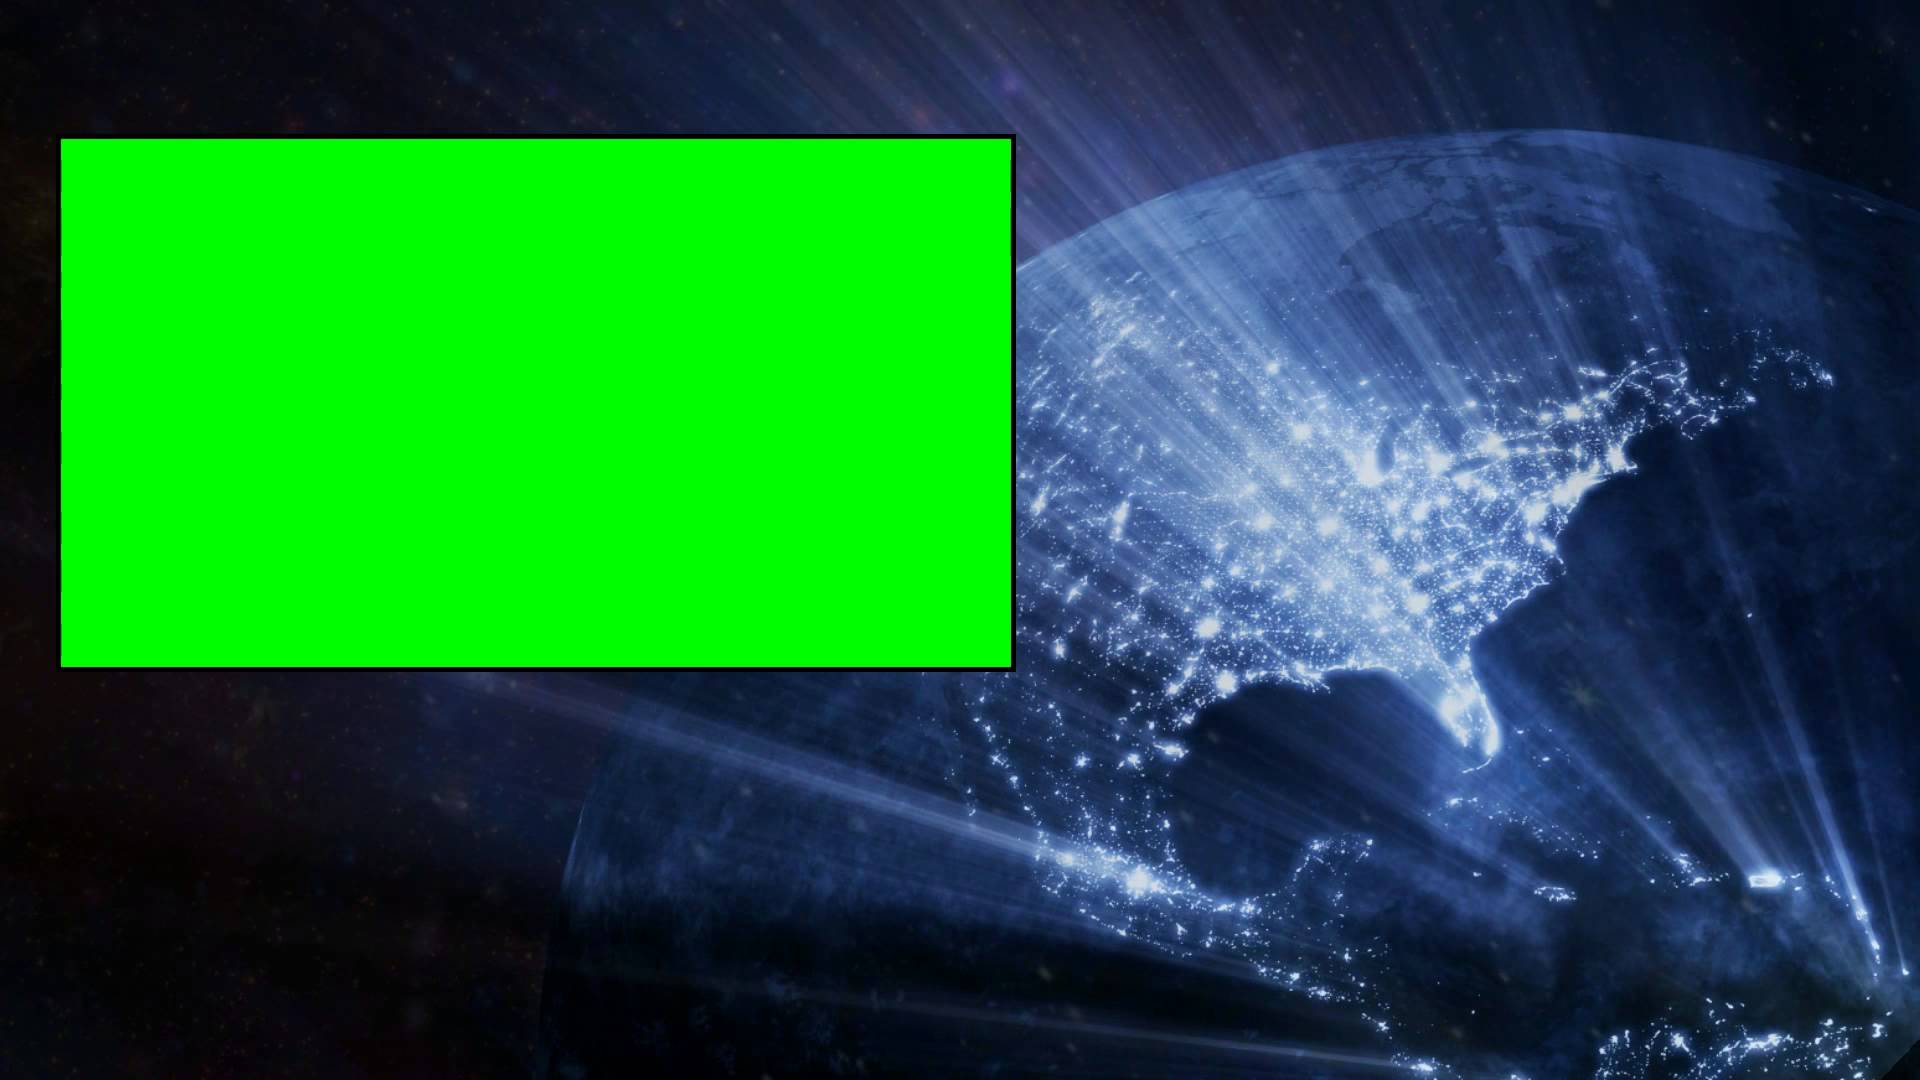 Free Background Images For Green Screen Background Editing Picsart Images